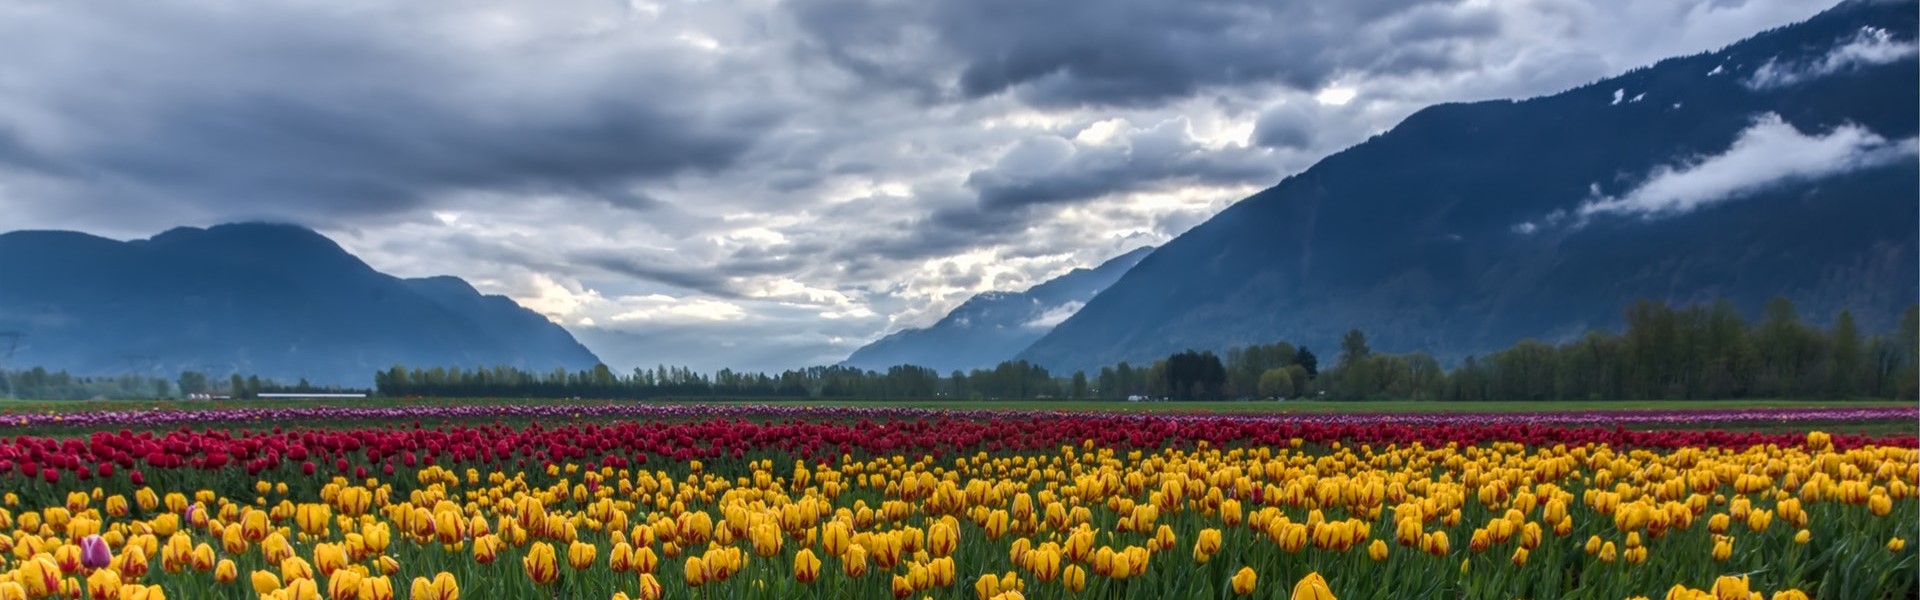 mountains behind a field of flowers